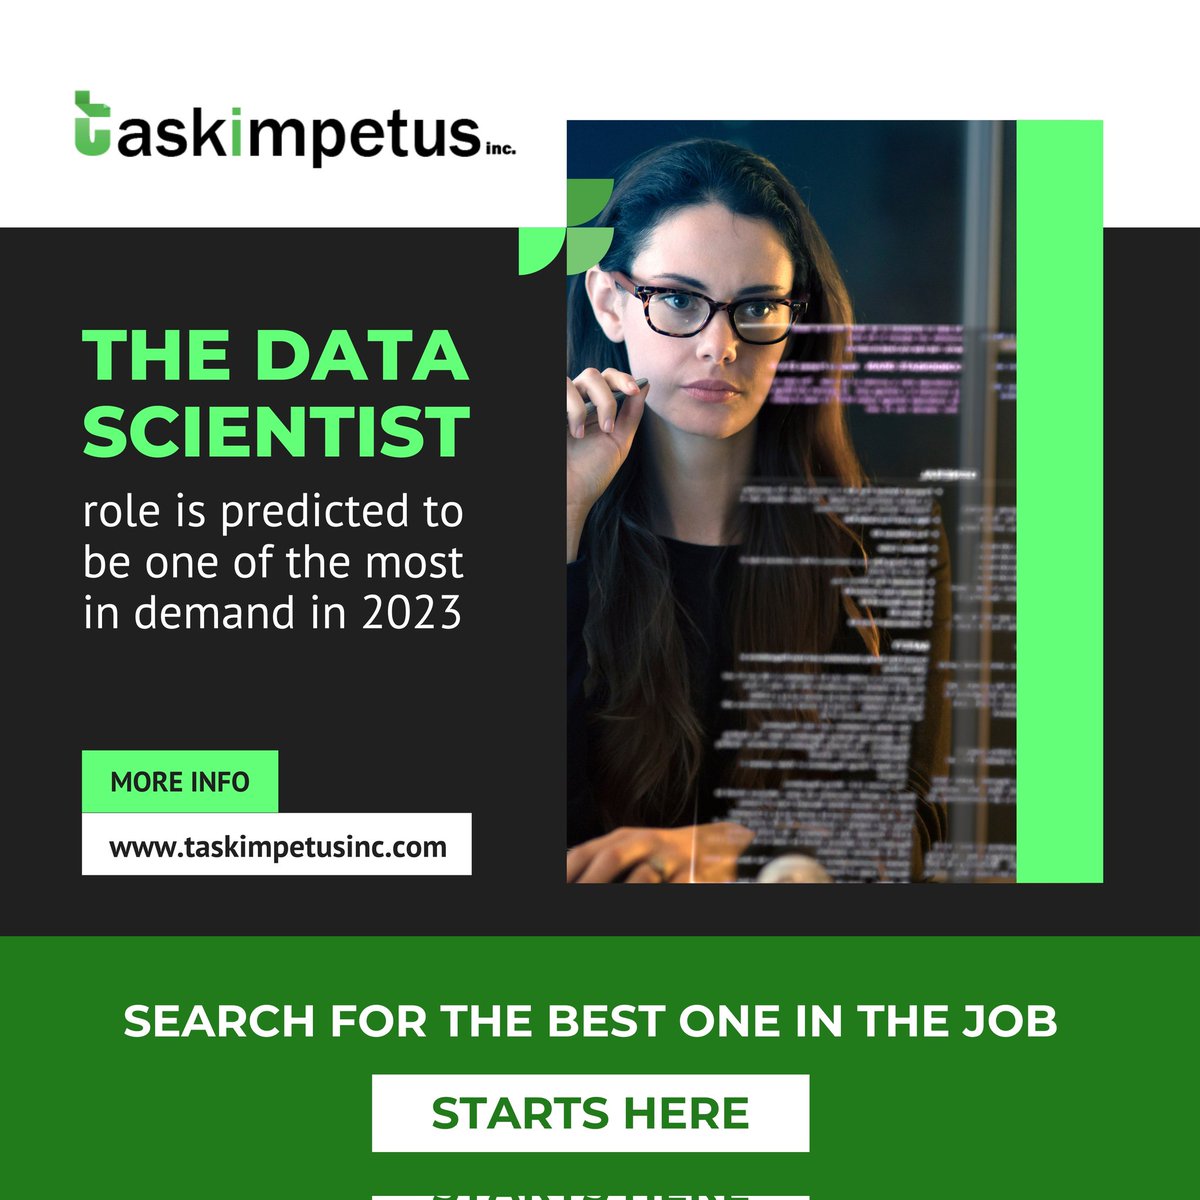 Data Science is booming❗

Connecting top talent with leading companies. 💻

#TaskImpetus #RecruitmentAgency #DataScienceJobs #JobsUSA #Career